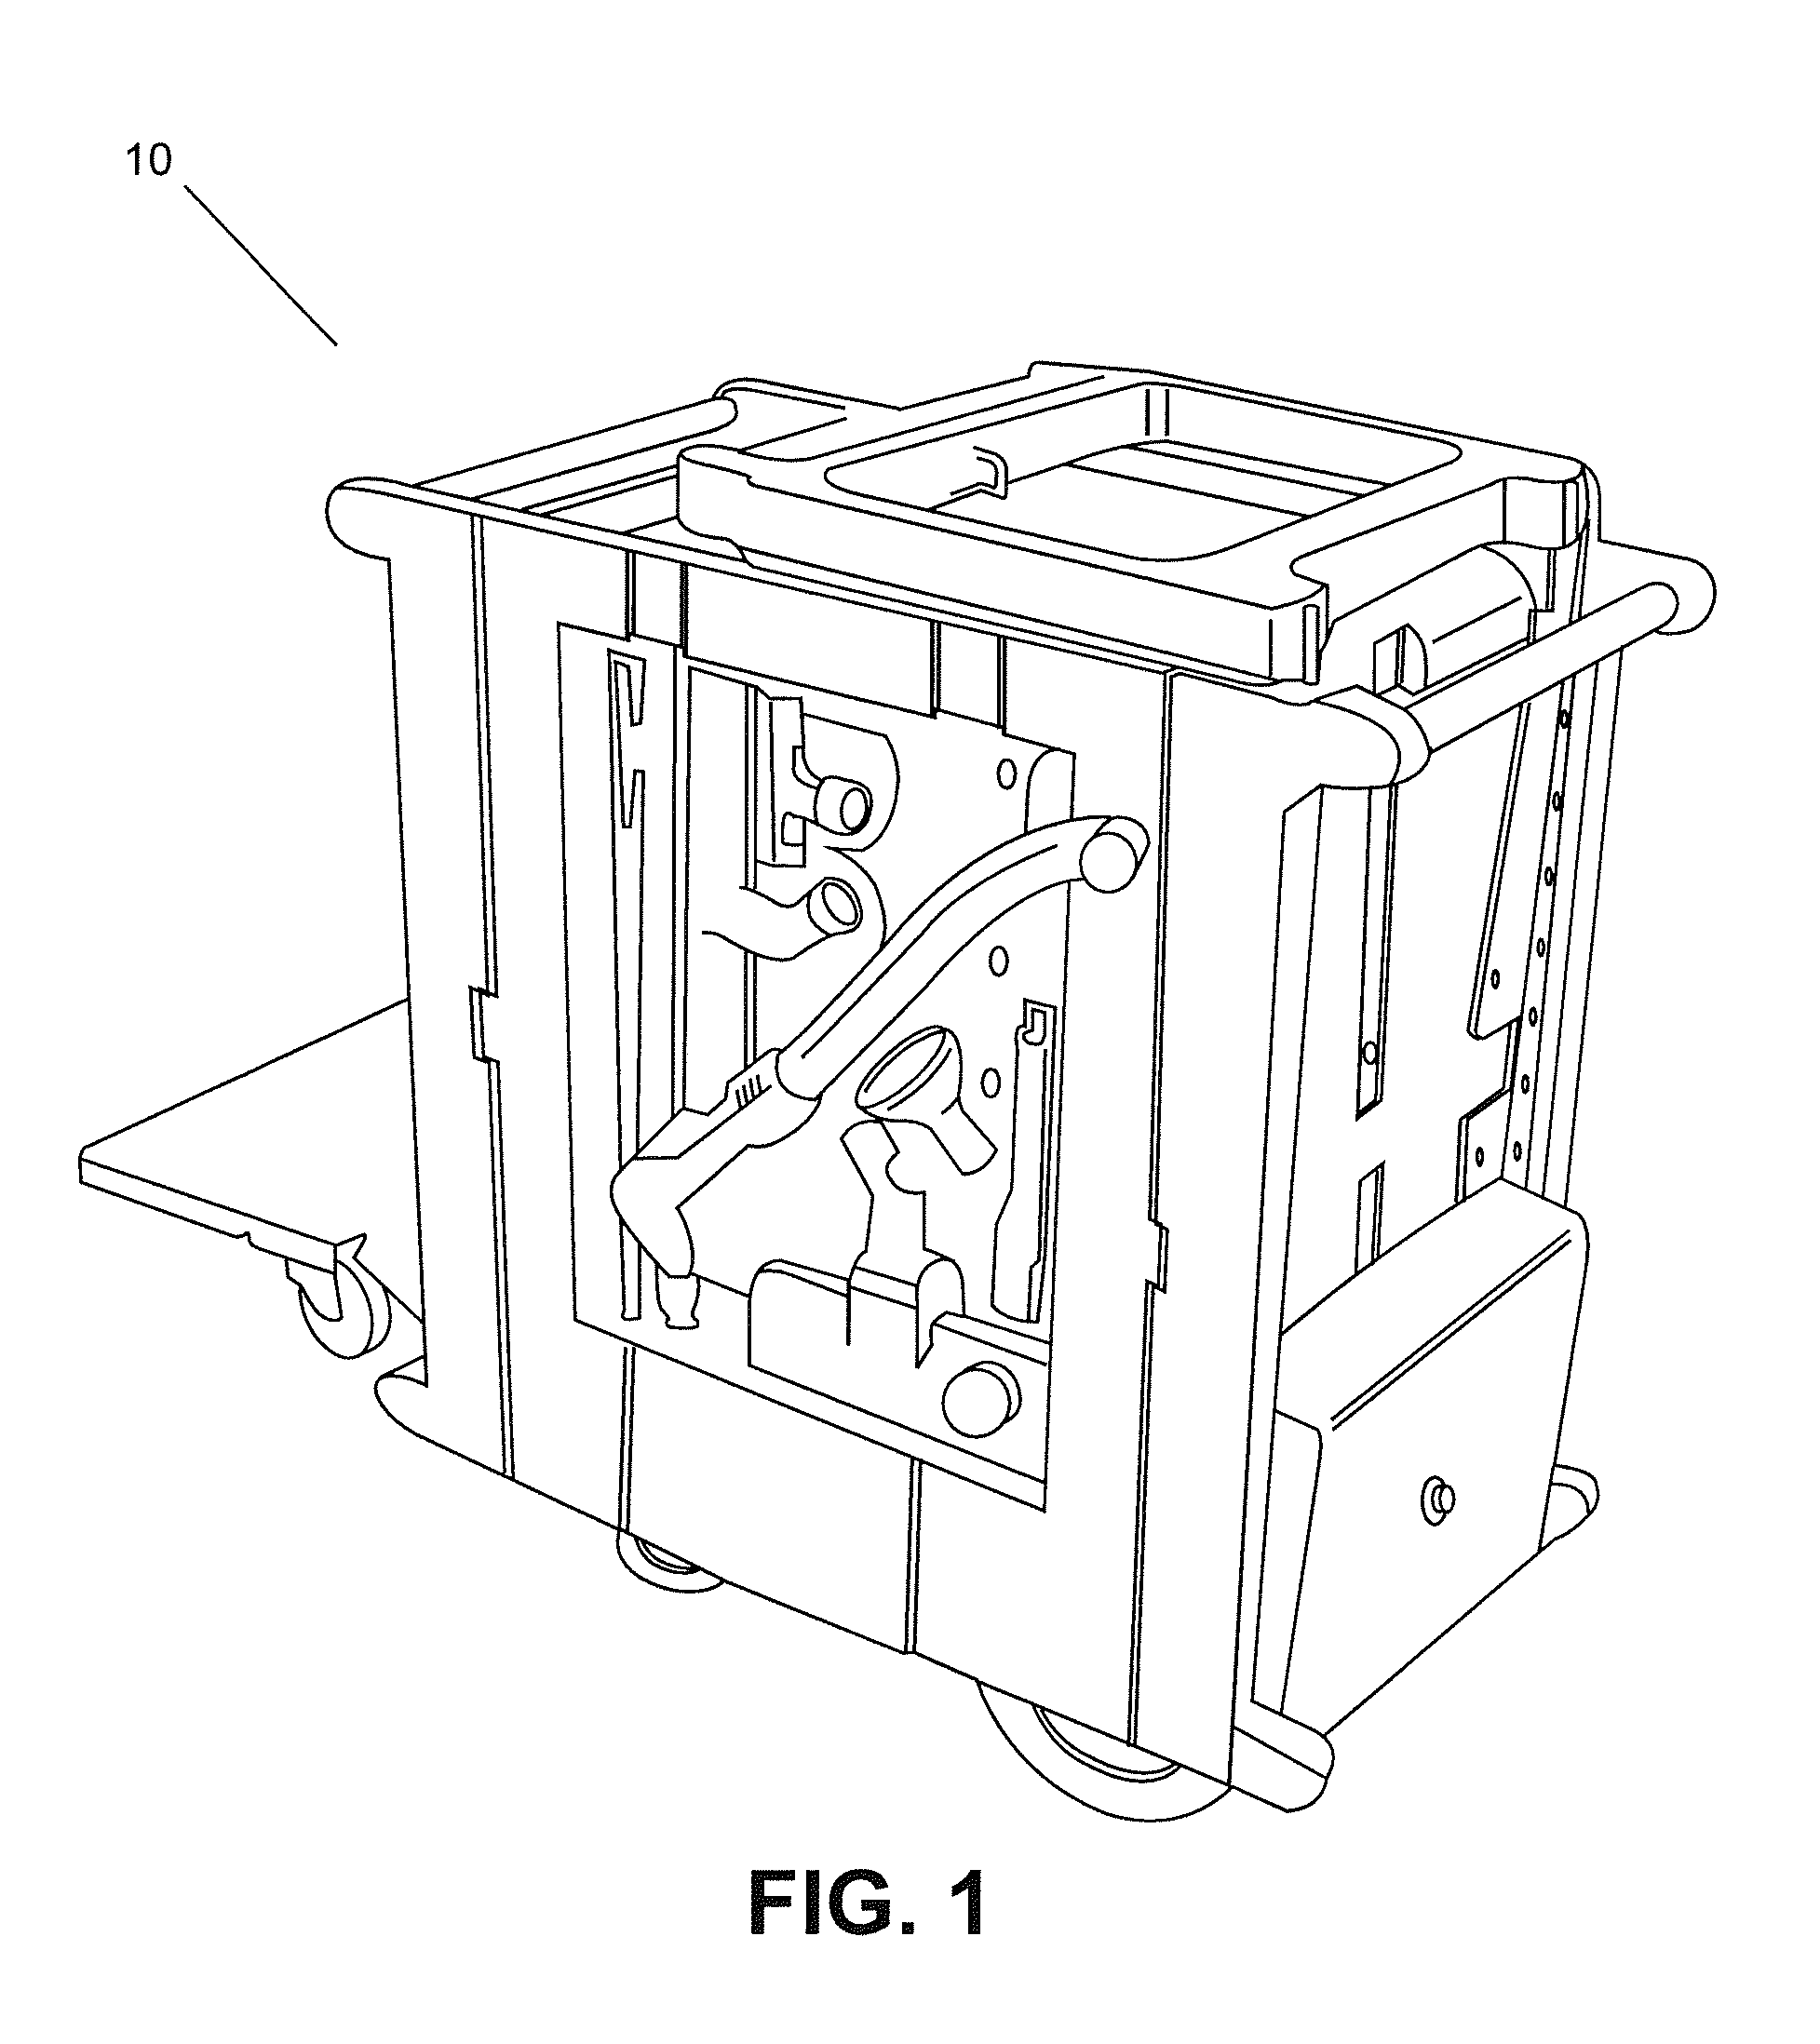 Patient room cleaning system and method